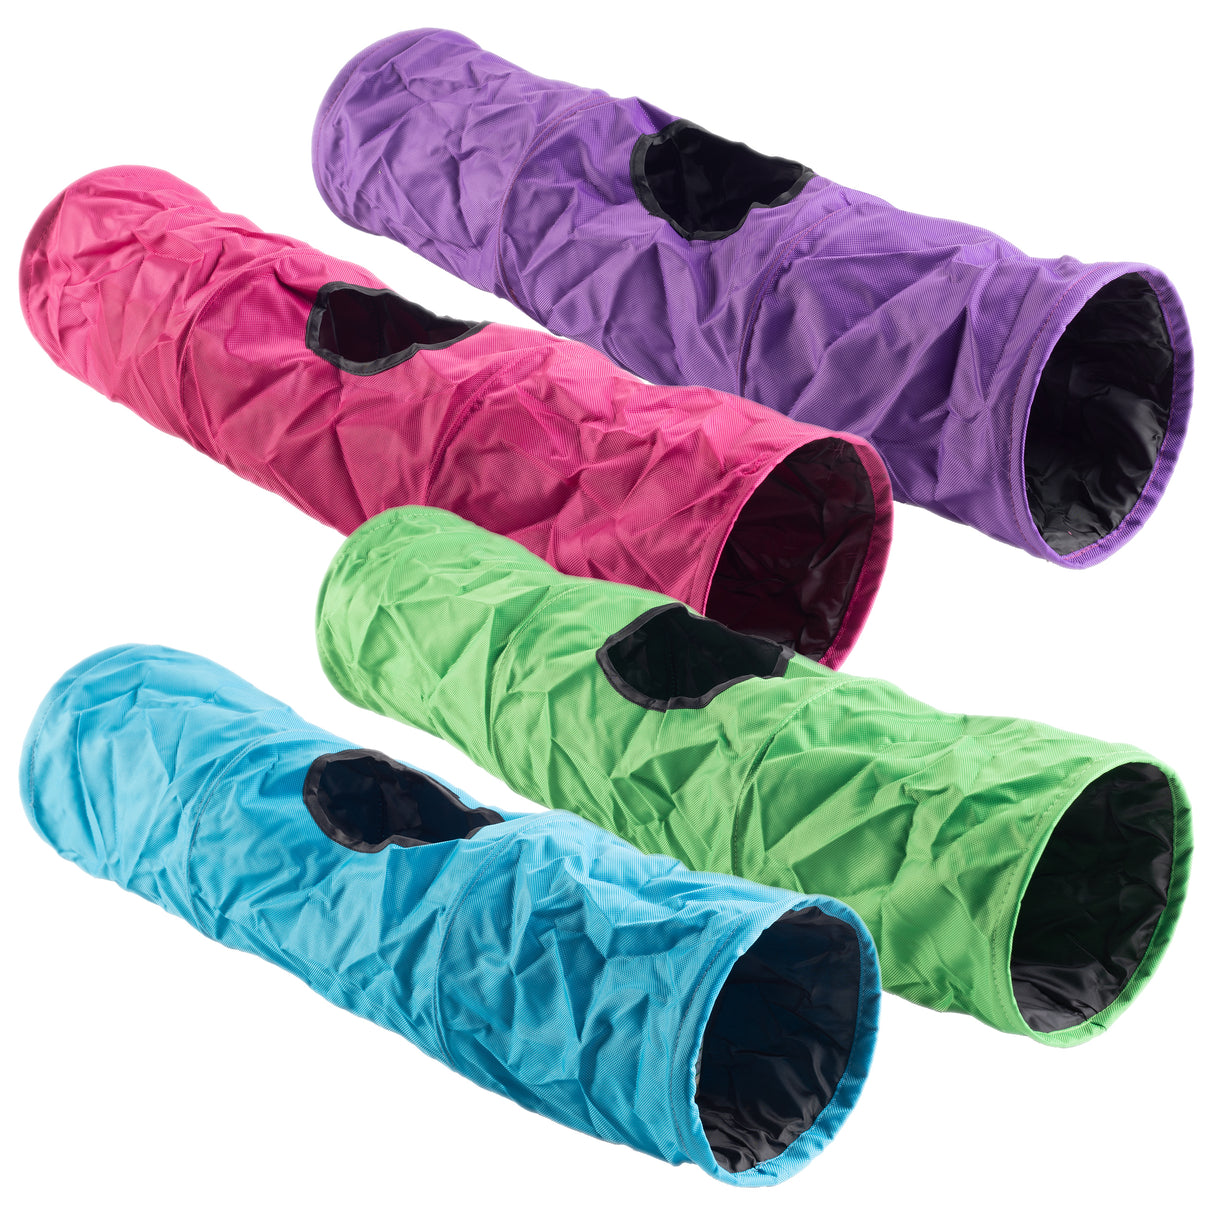 1 count Kaytee Crinkle Tunnel Oversized Crinkling Tube for Small Pets